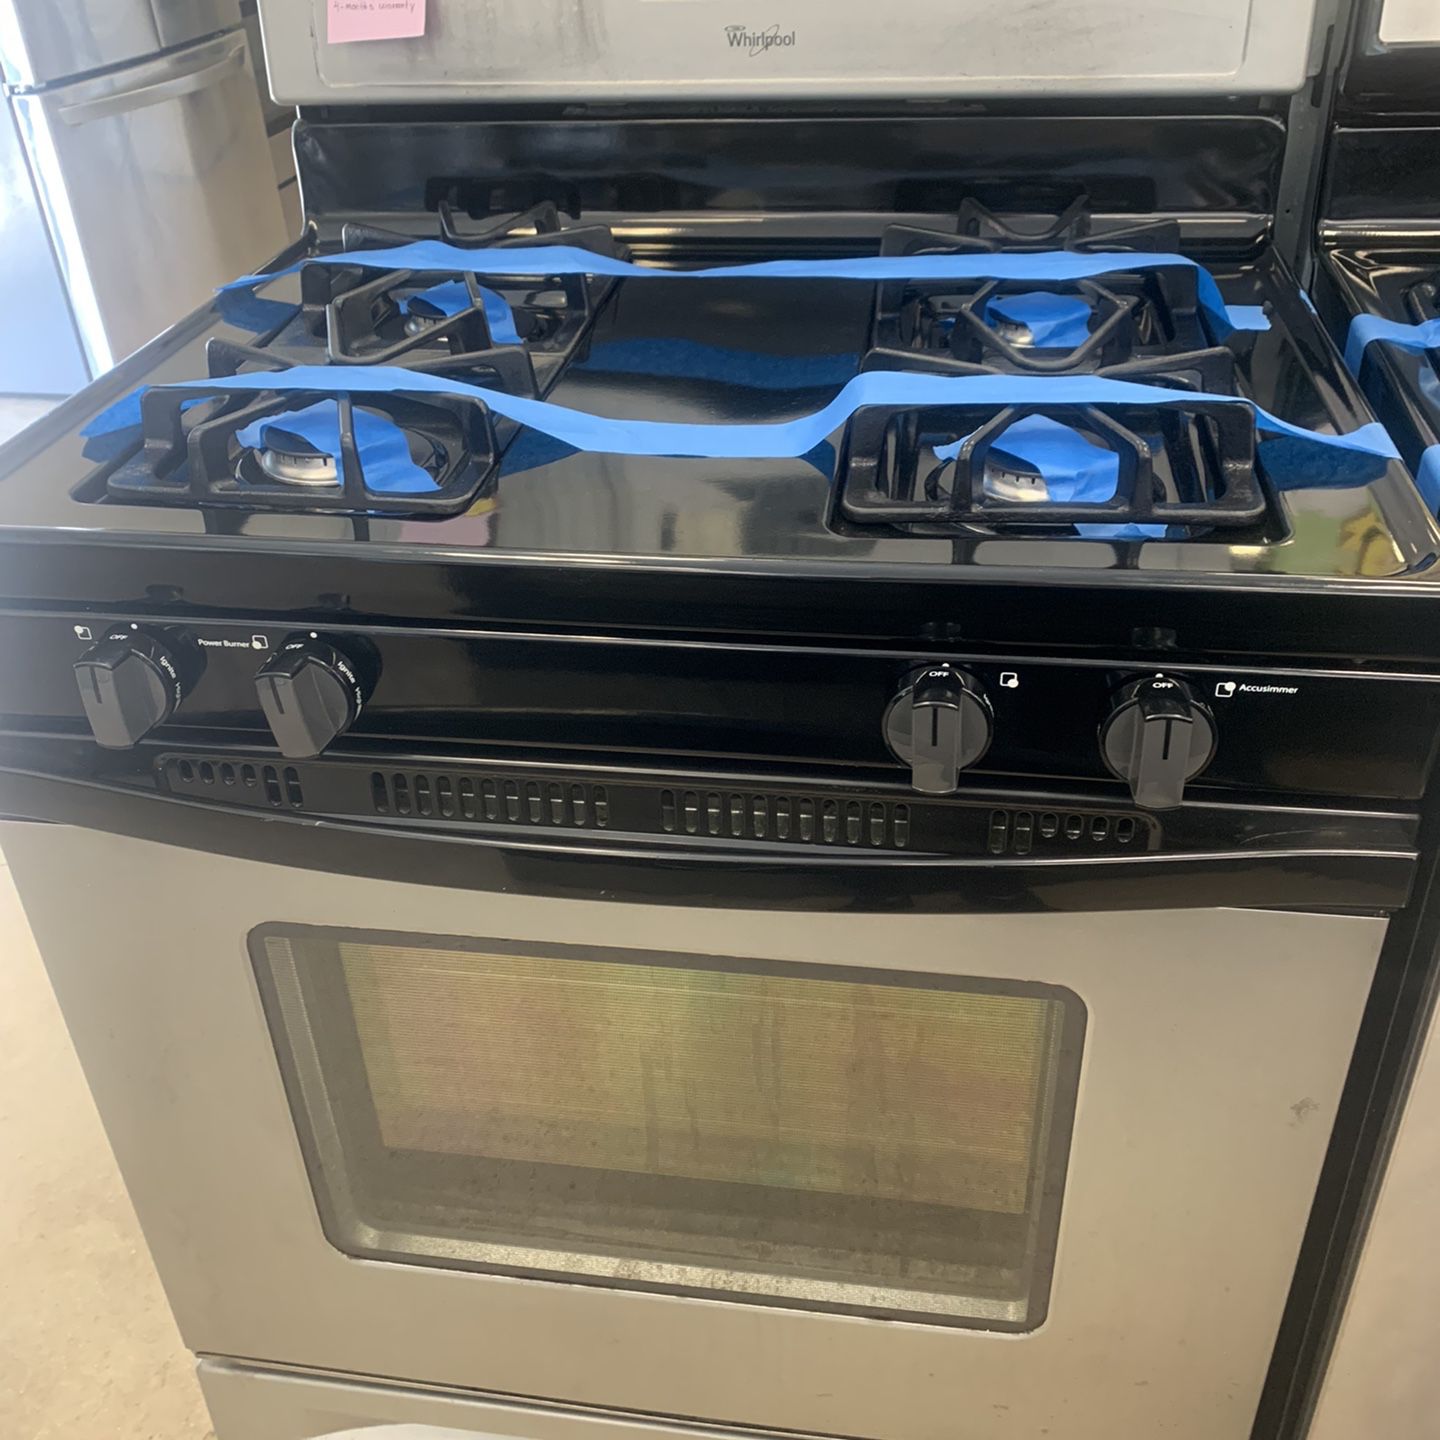 Whirlpool Used Gas Stove Working Perfectly 4 Months Warranty 